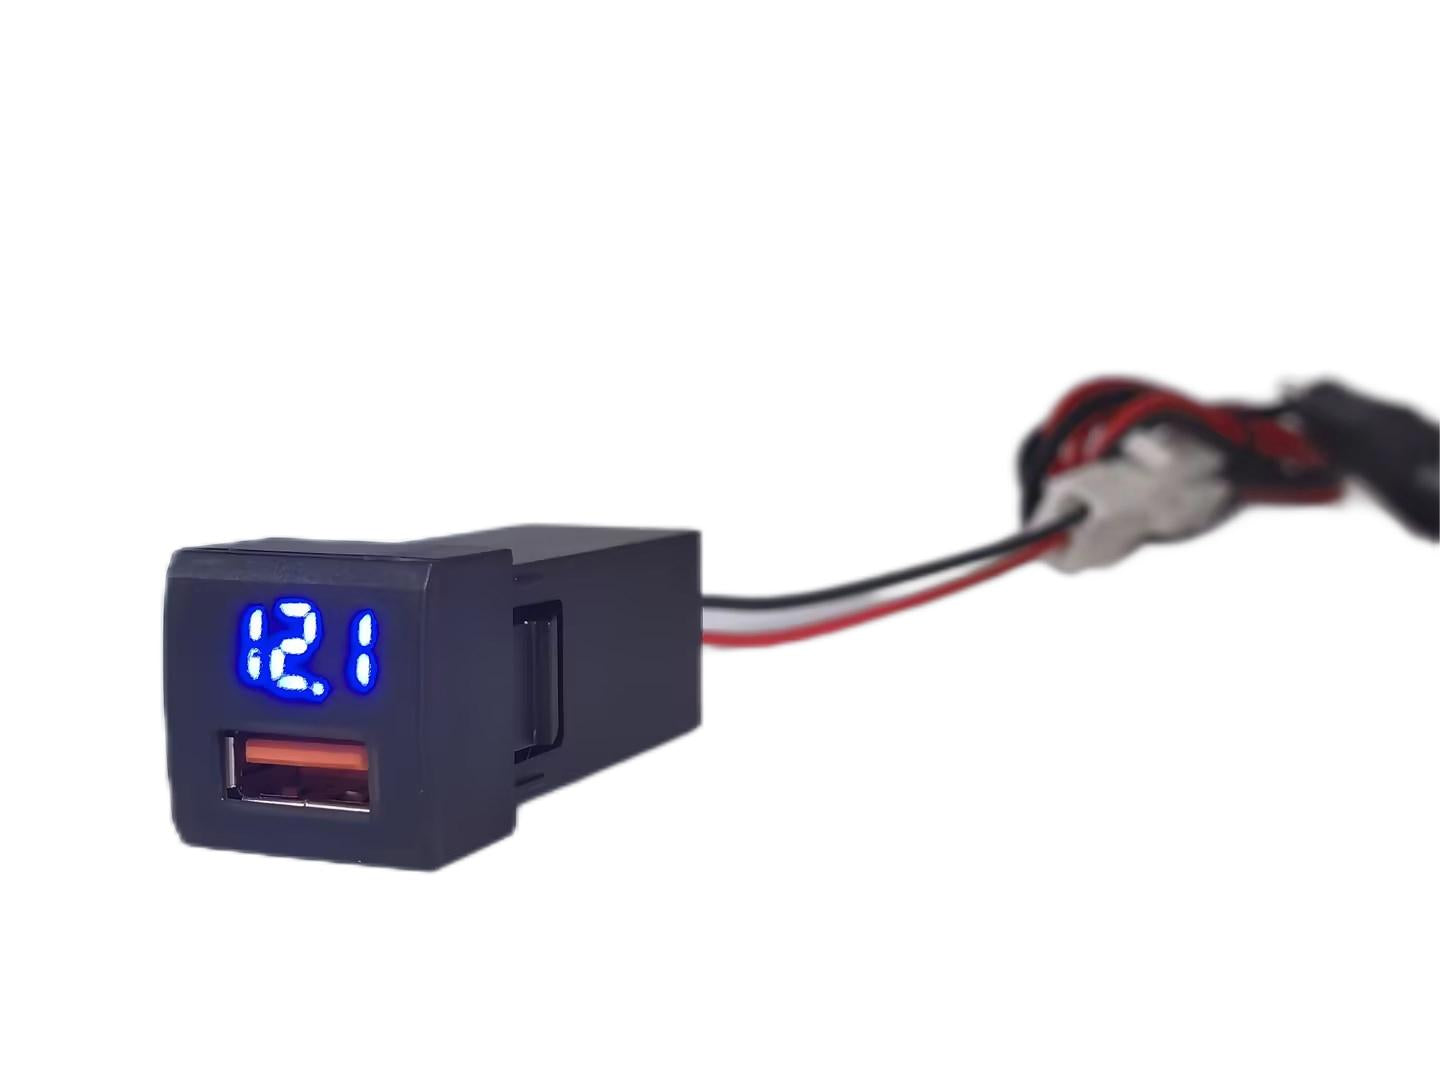 Toyota QC3 Charger + Volt Meter  (22mm X 22mm)